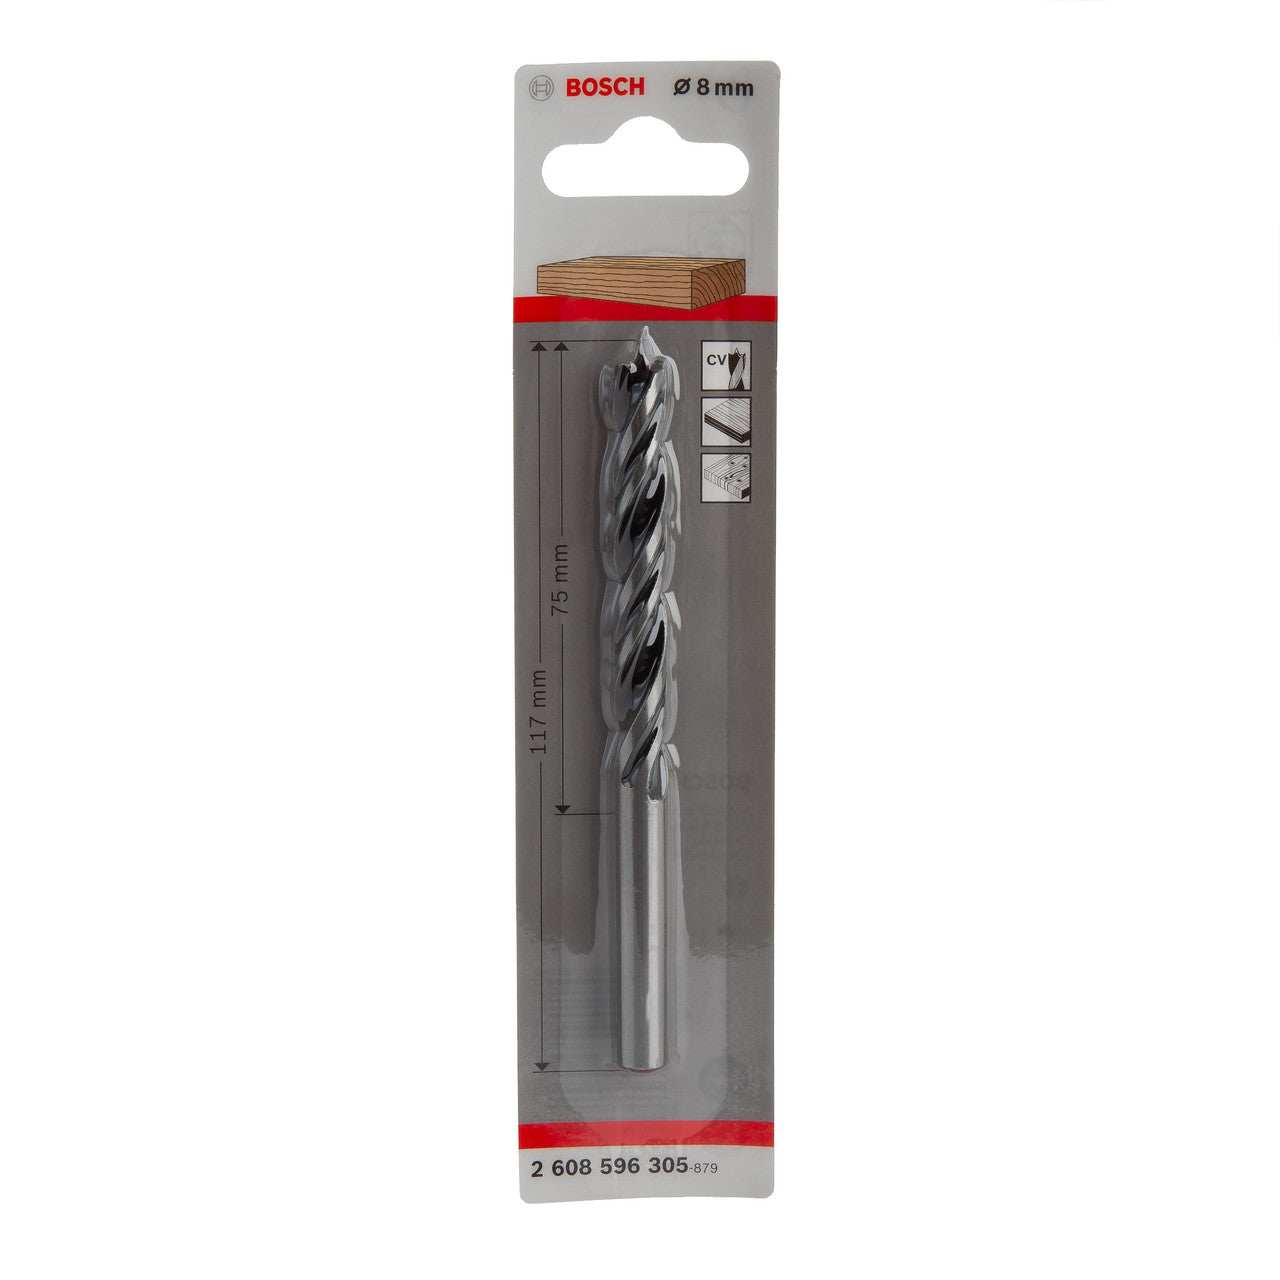 Bosch Brad point drill bit ( Select Size ) Power Tool Services